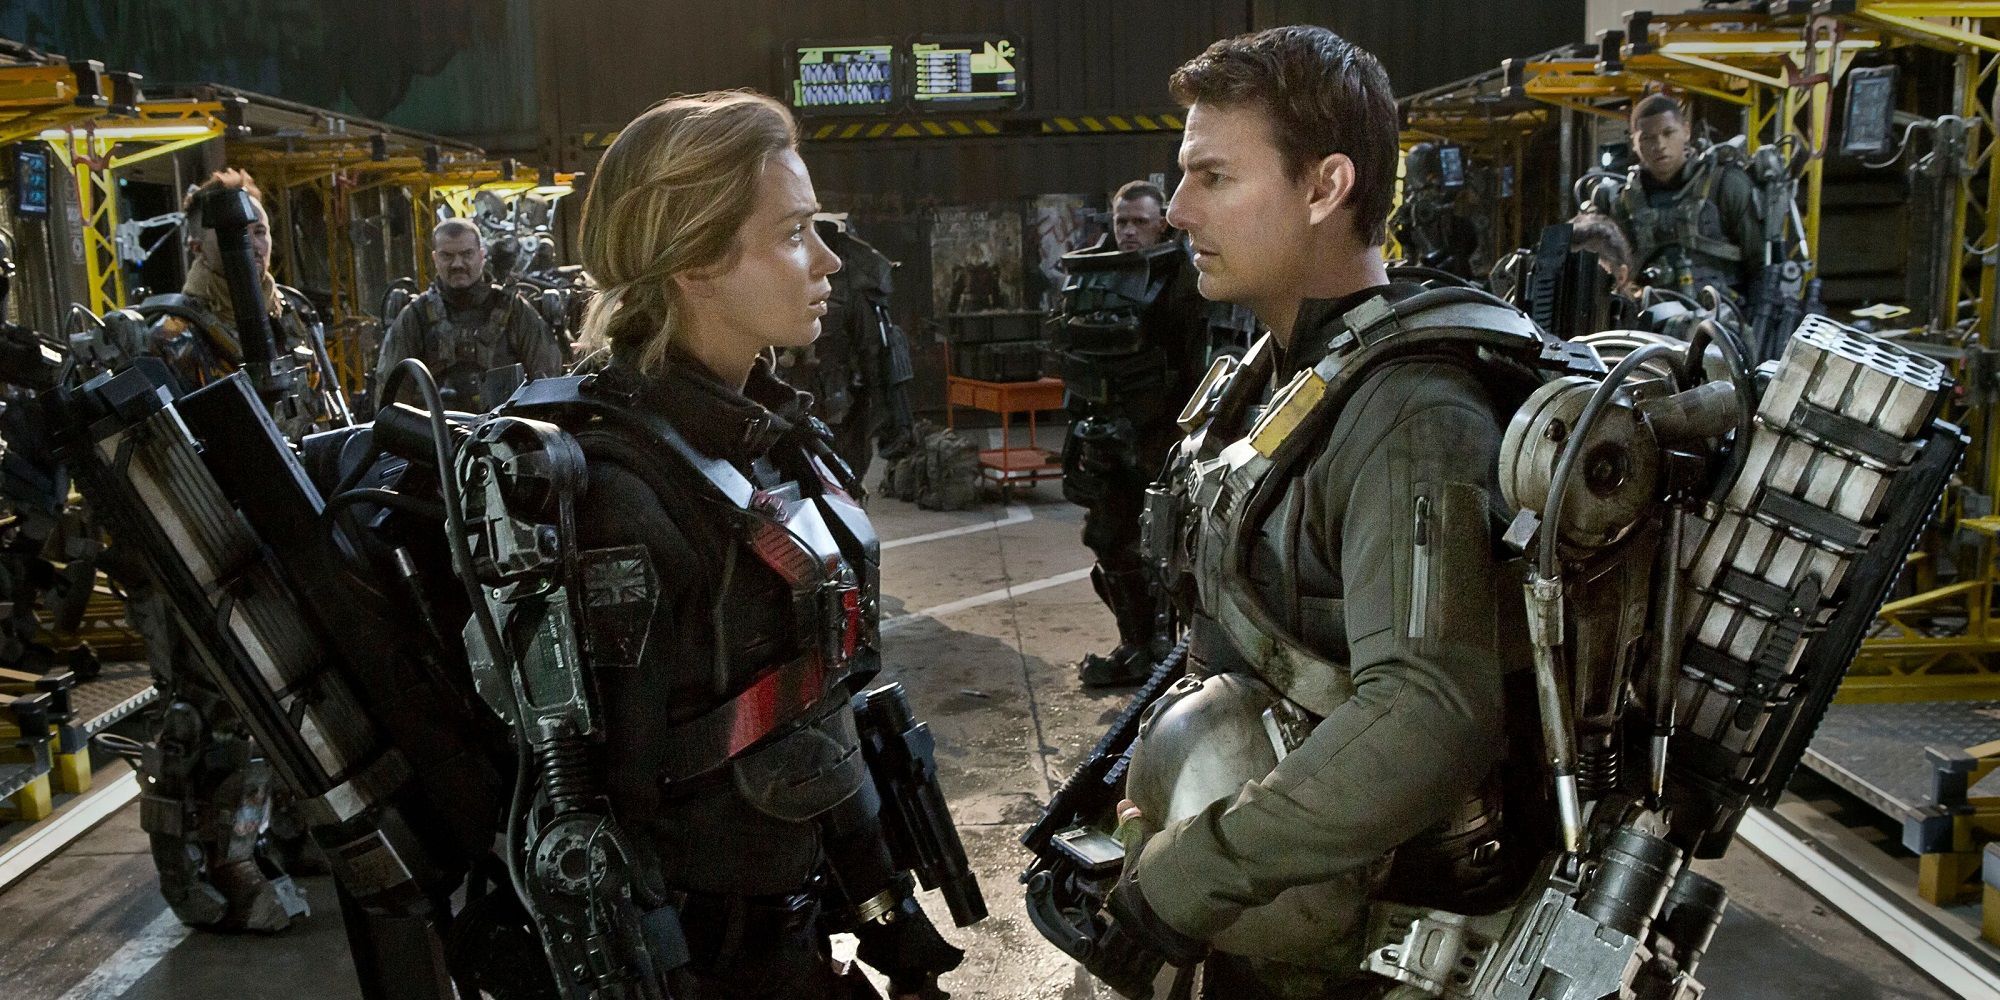 Rita and Ron meet each other in Edge of Tomorrow.